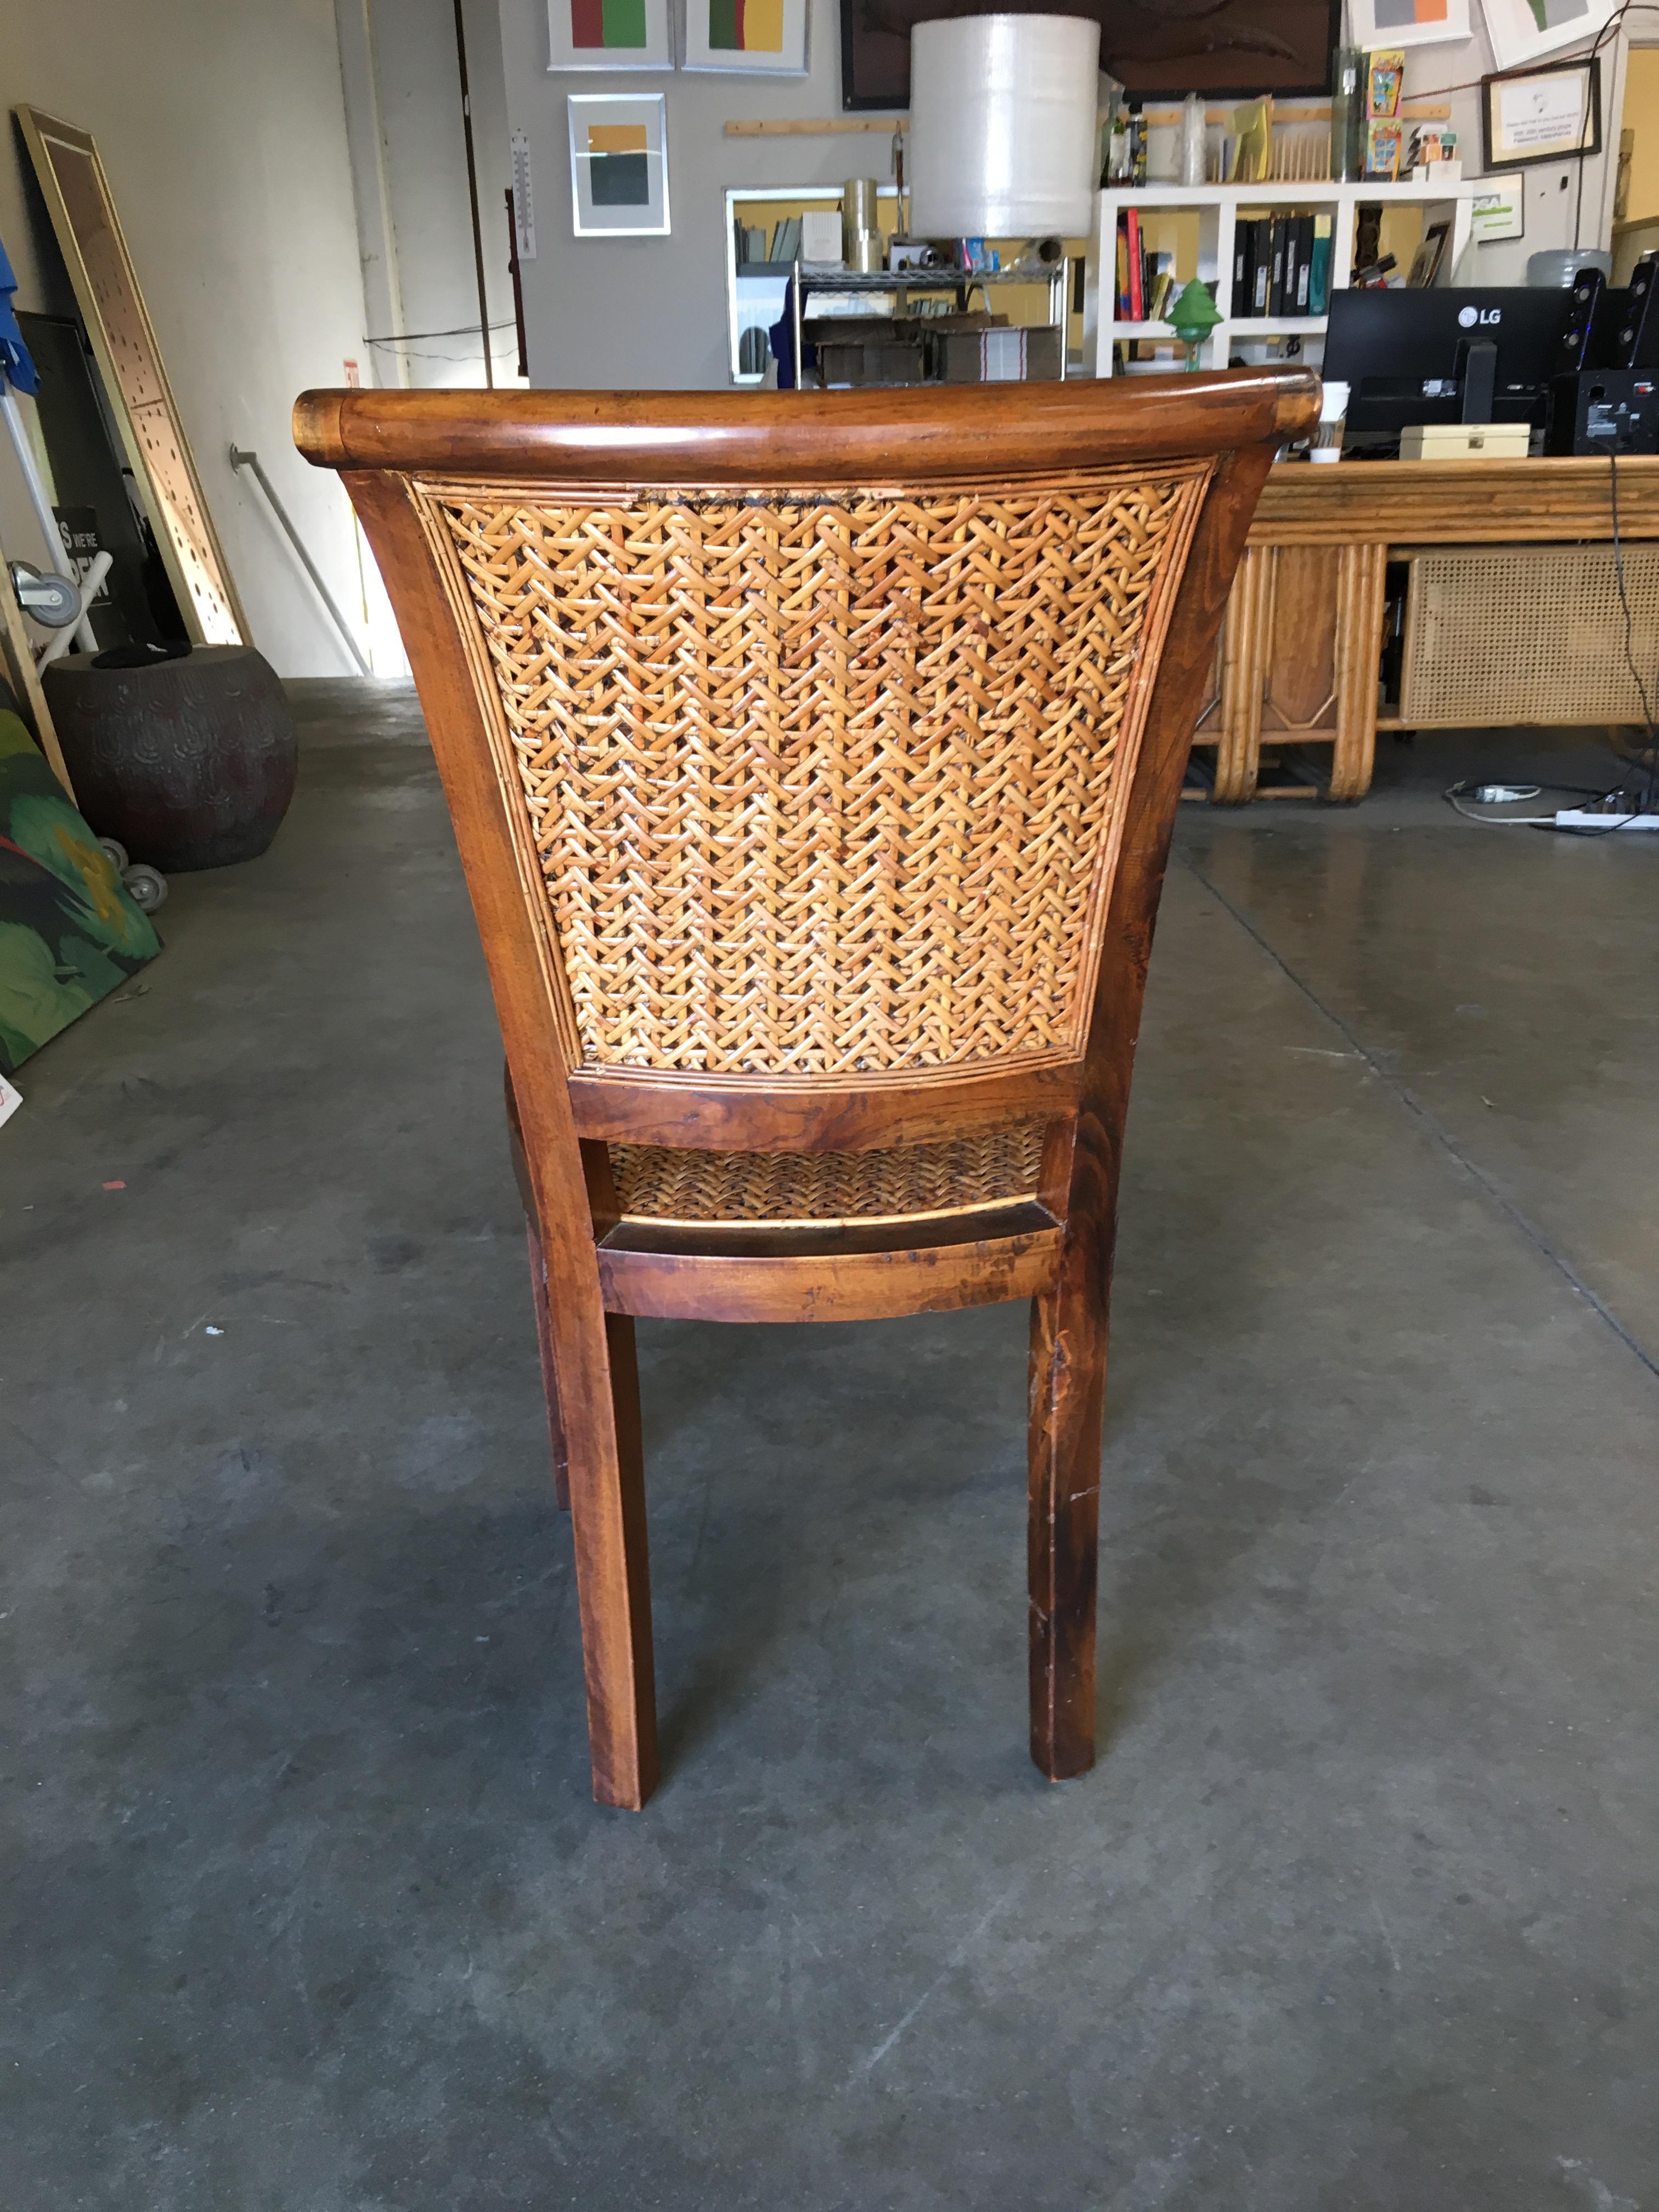 American High Style Midcentury Mahogany Dining Chair with Woven Wicker Seat